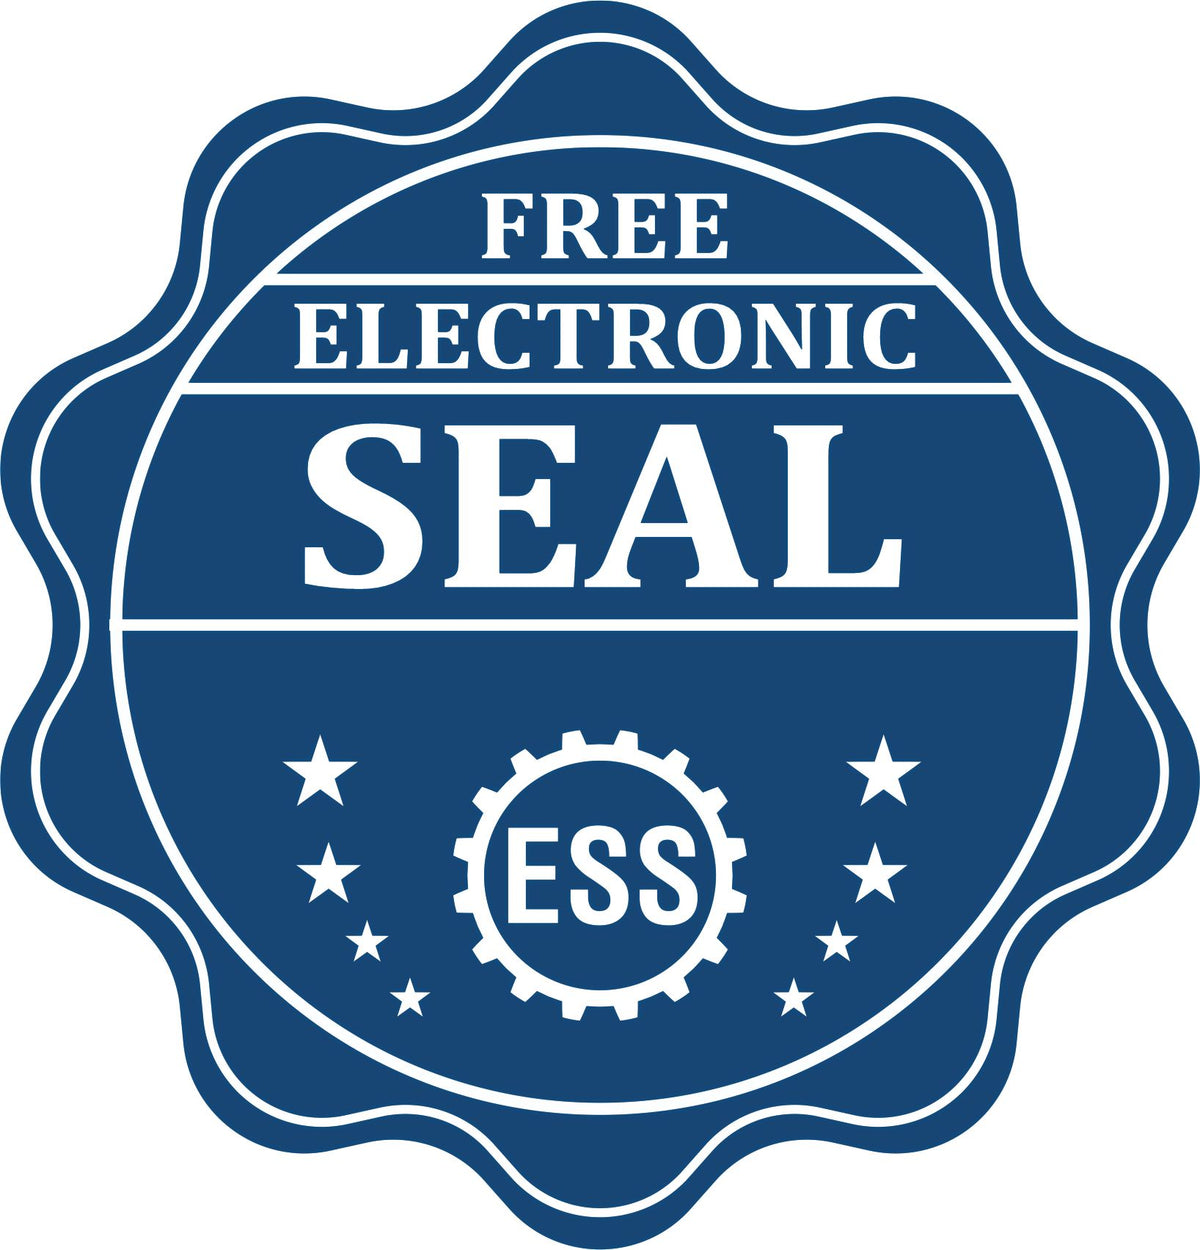 A badge showing a free electronic seal for the Slim Pre-Inked Illinois Professional Geologist Seal Stamp with stars and the ESS gear on the emblem.